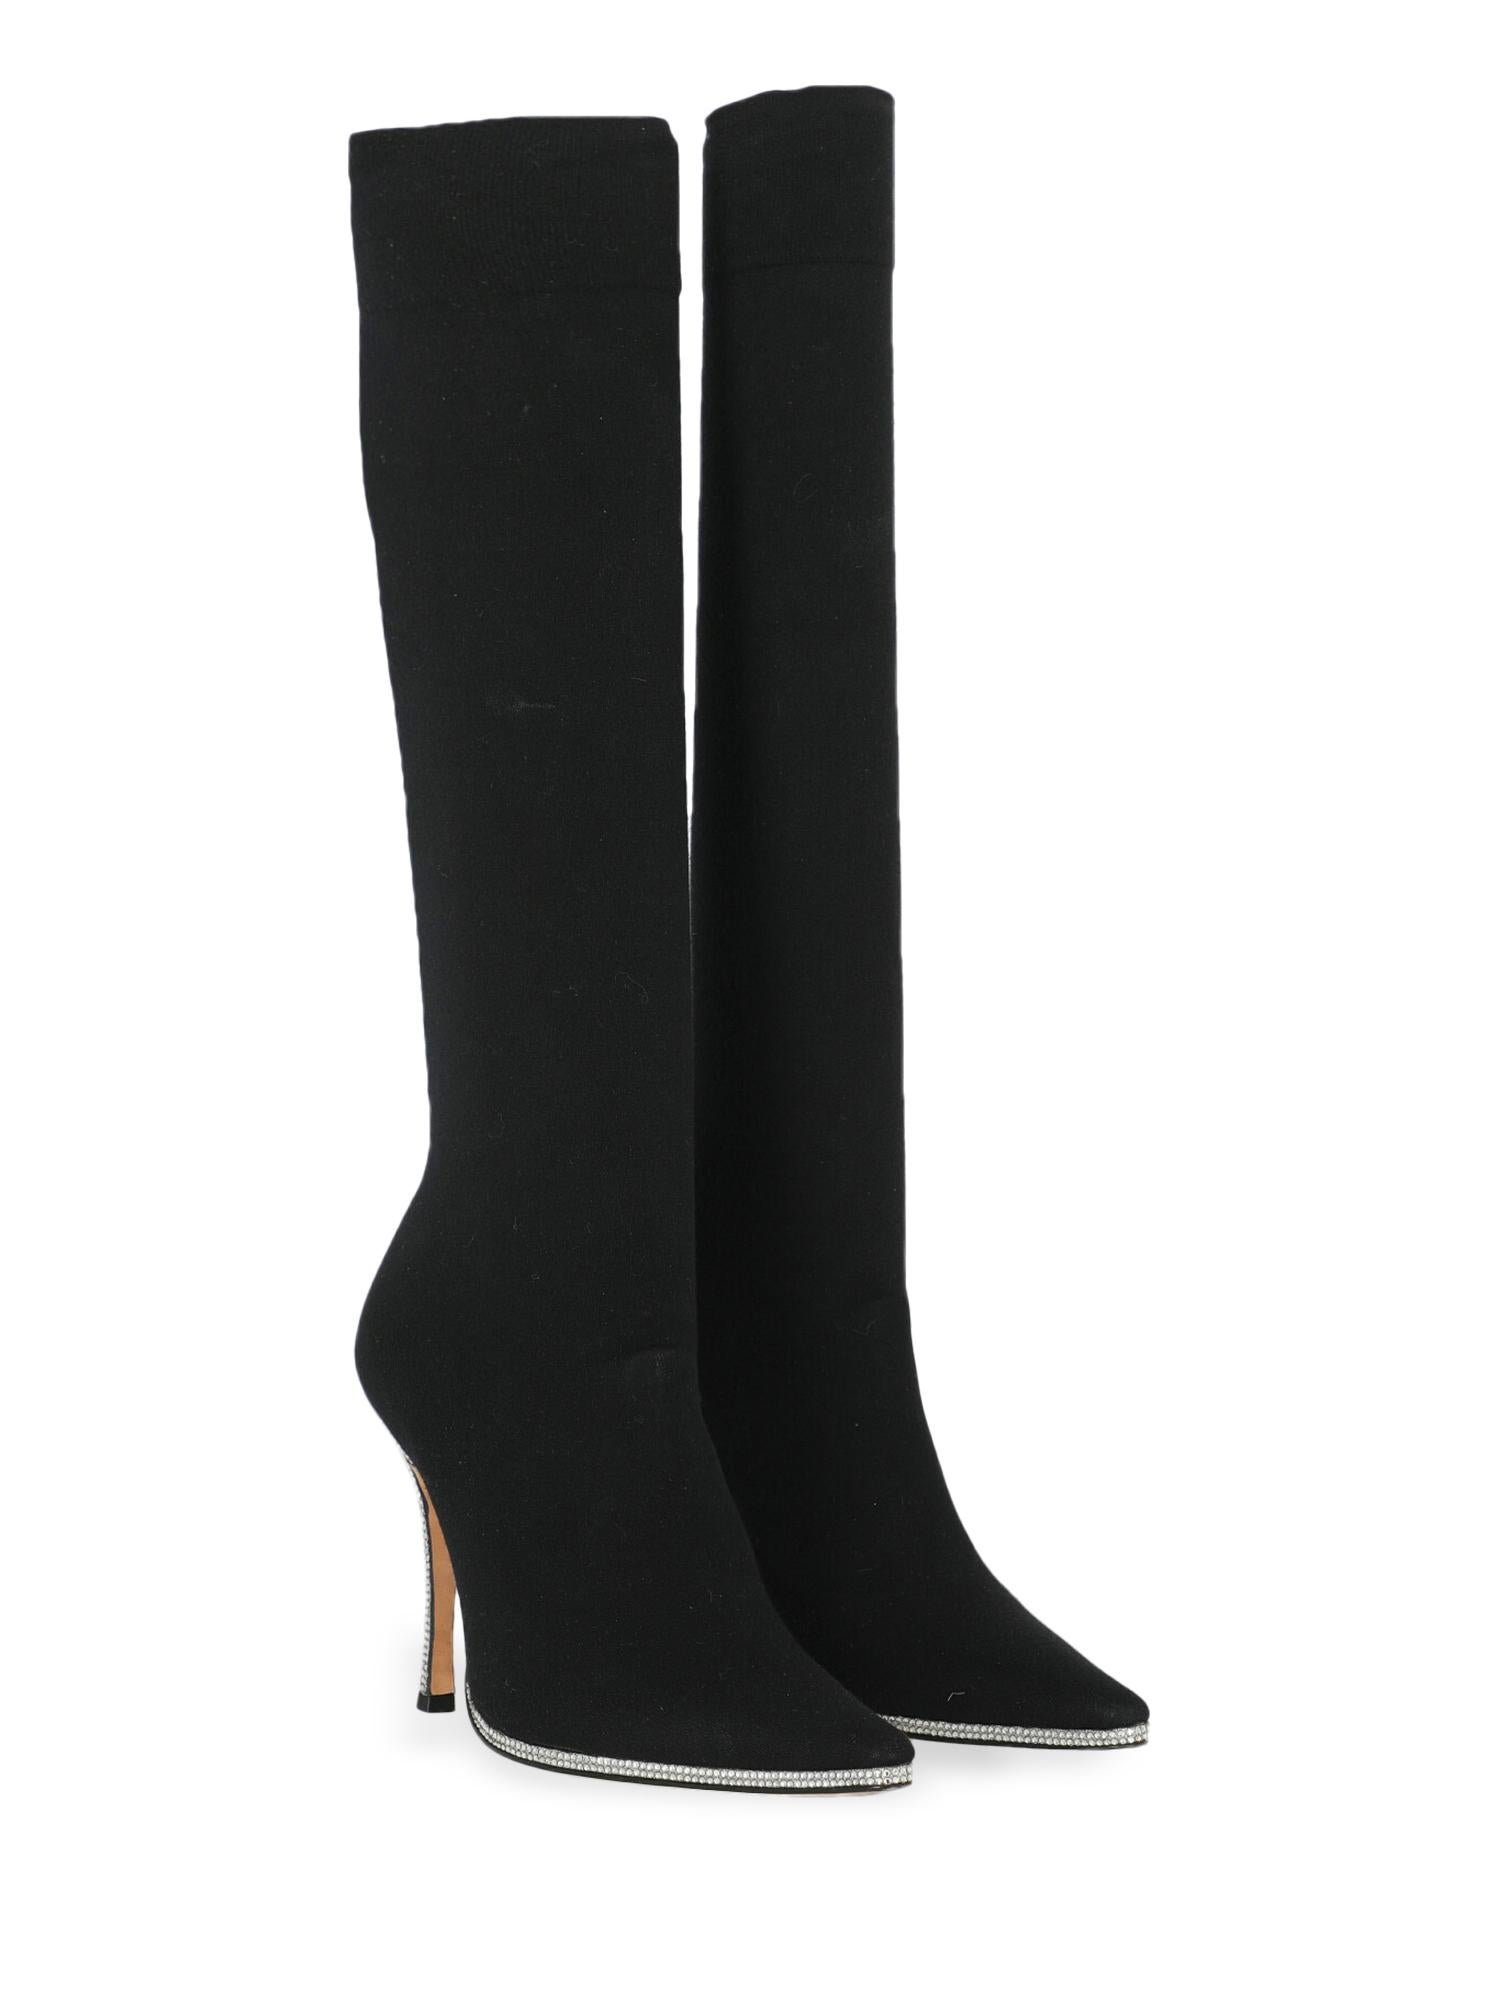 Product Description: Boots, synthetic fibers, solid color, pointed toe, branded insole, leather insole, tapered heel, high heel, embellished heel

Includes:
- Dust bag

Product Condition: Very Good
Sole: visible signs of use.

Measurements:
Height: